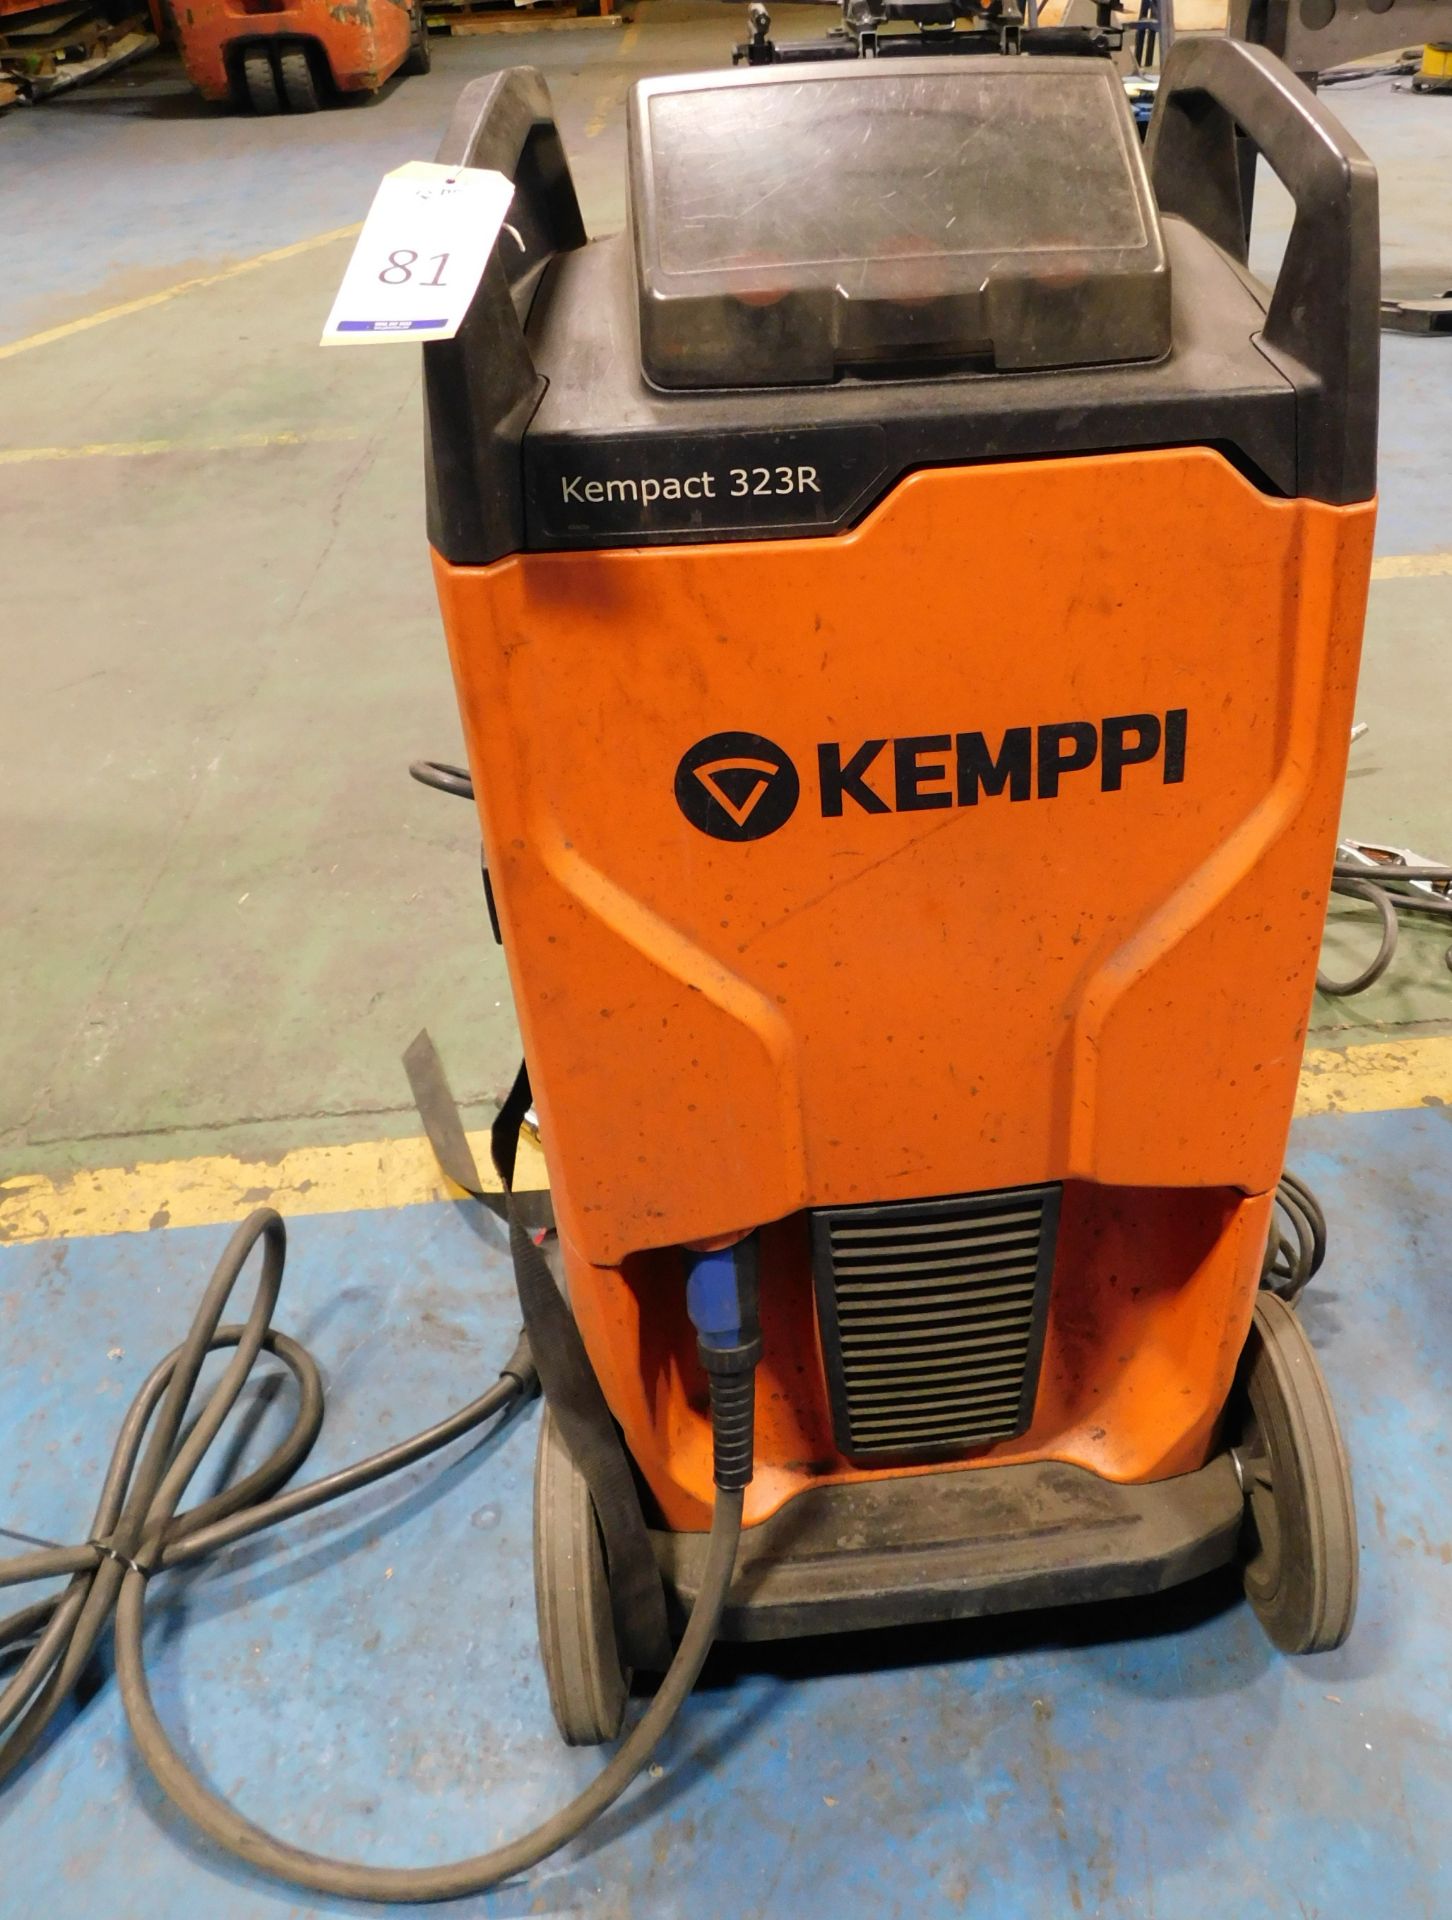 Kemppi Kempact 323R Compact MIG Welder, Serial Number: 2196583 (Location: Kettering - See General